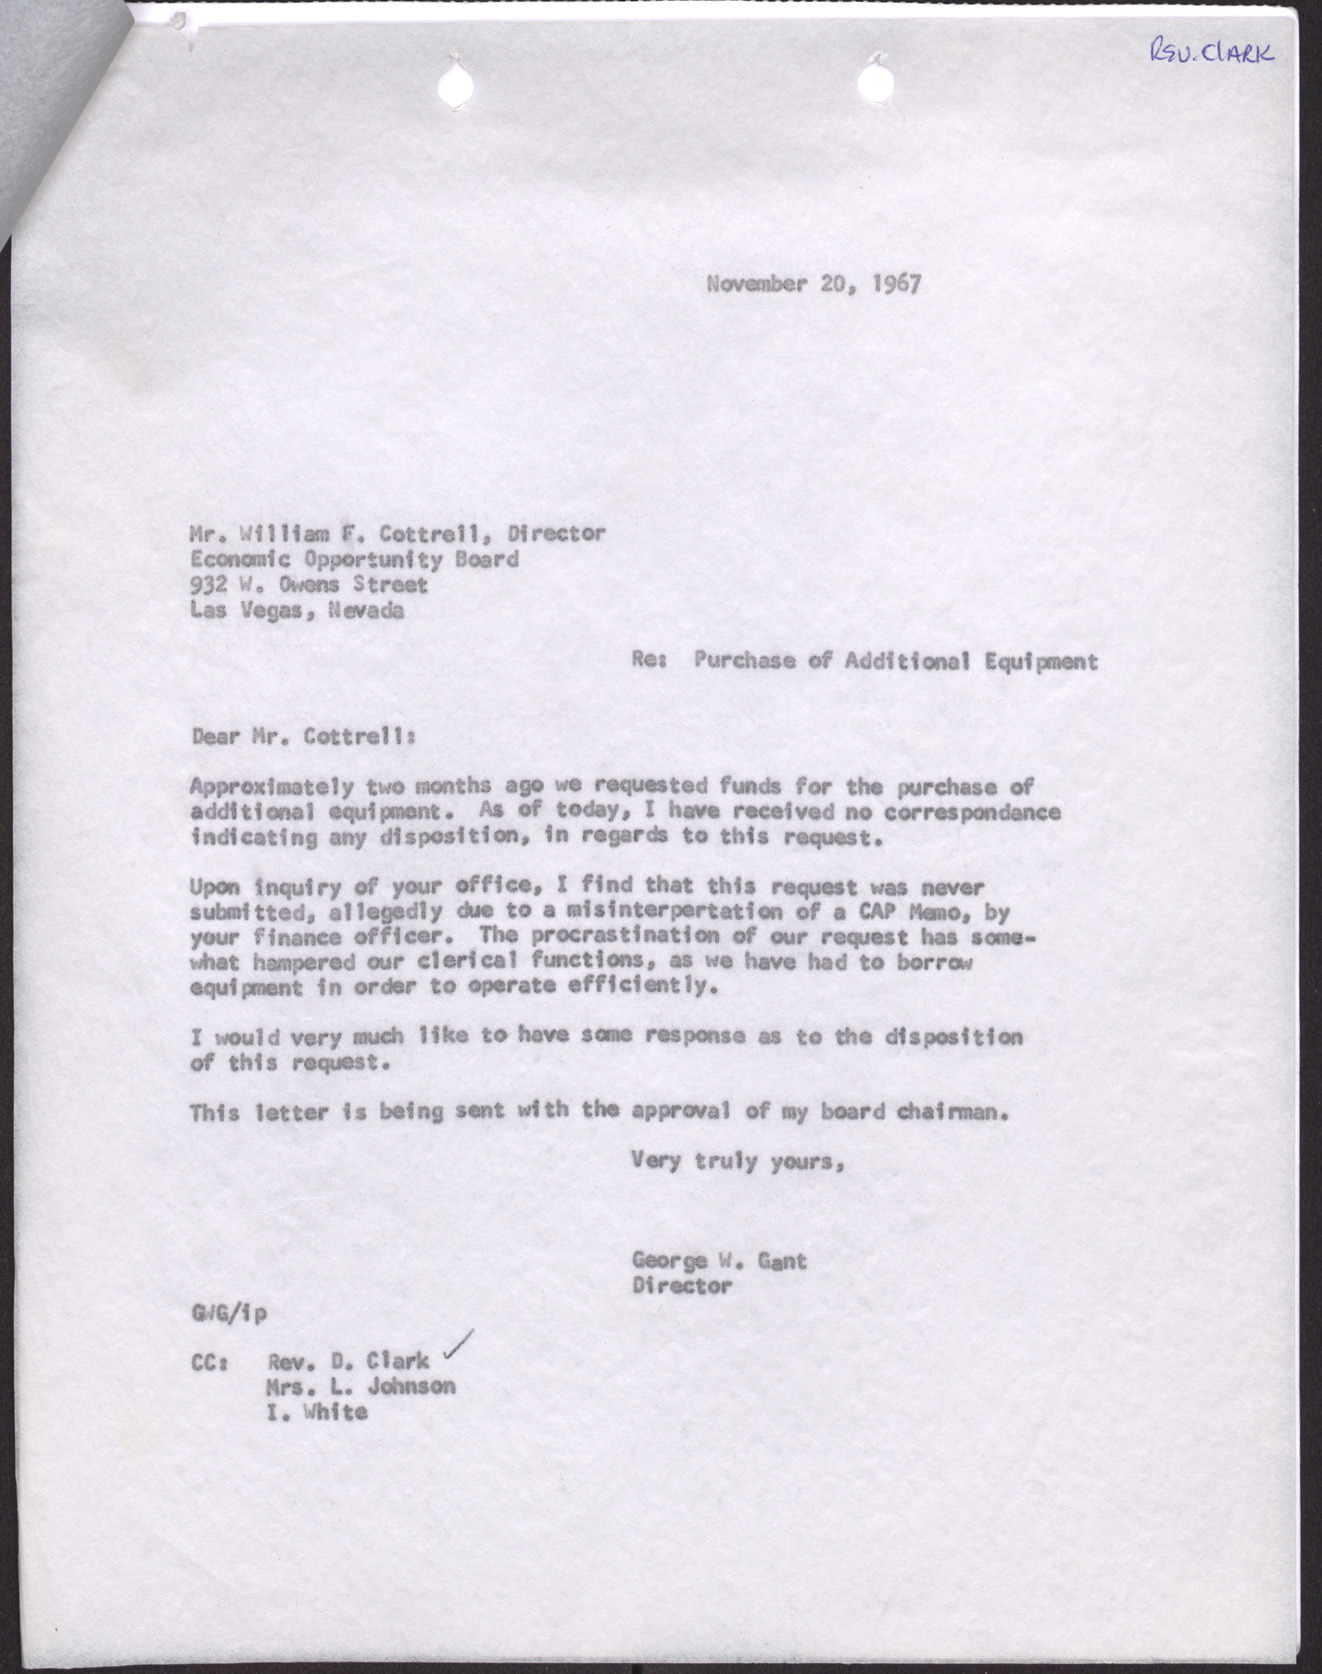 Letter to Mr. William F. Cottrell from George W. Gant, November 20, 1967